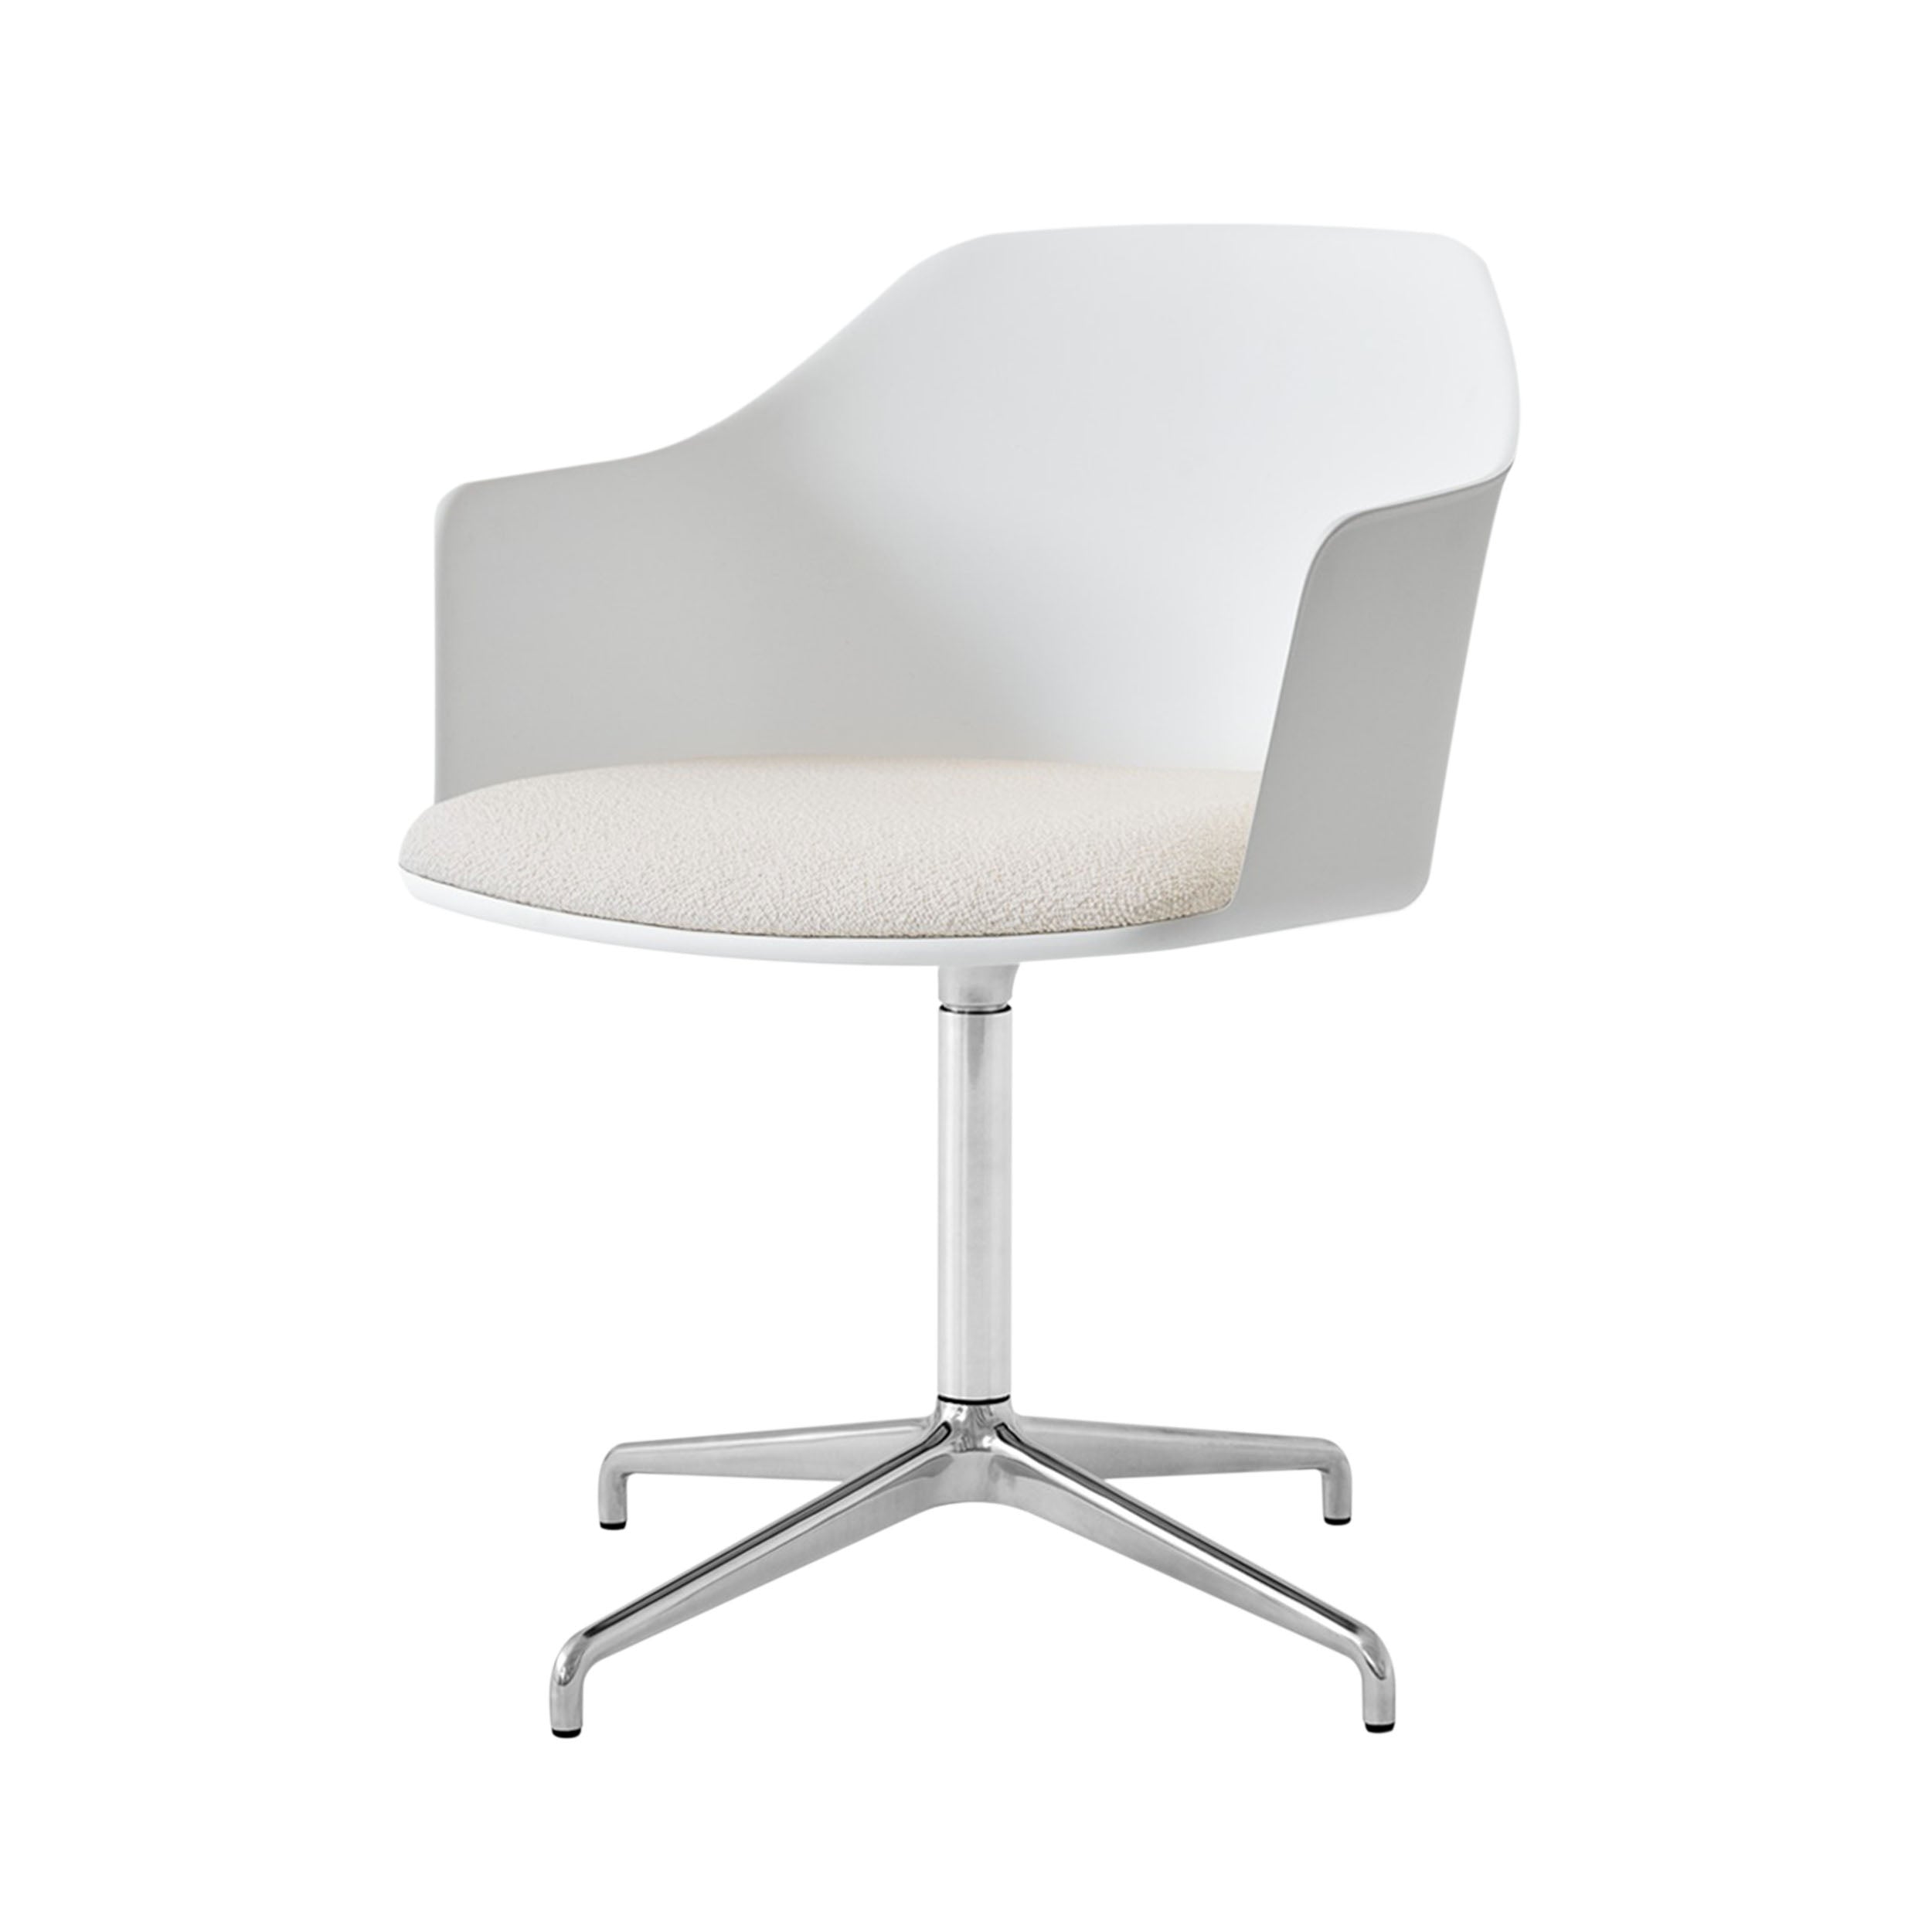 Rely Chair HW44: Polished Aluminum + White